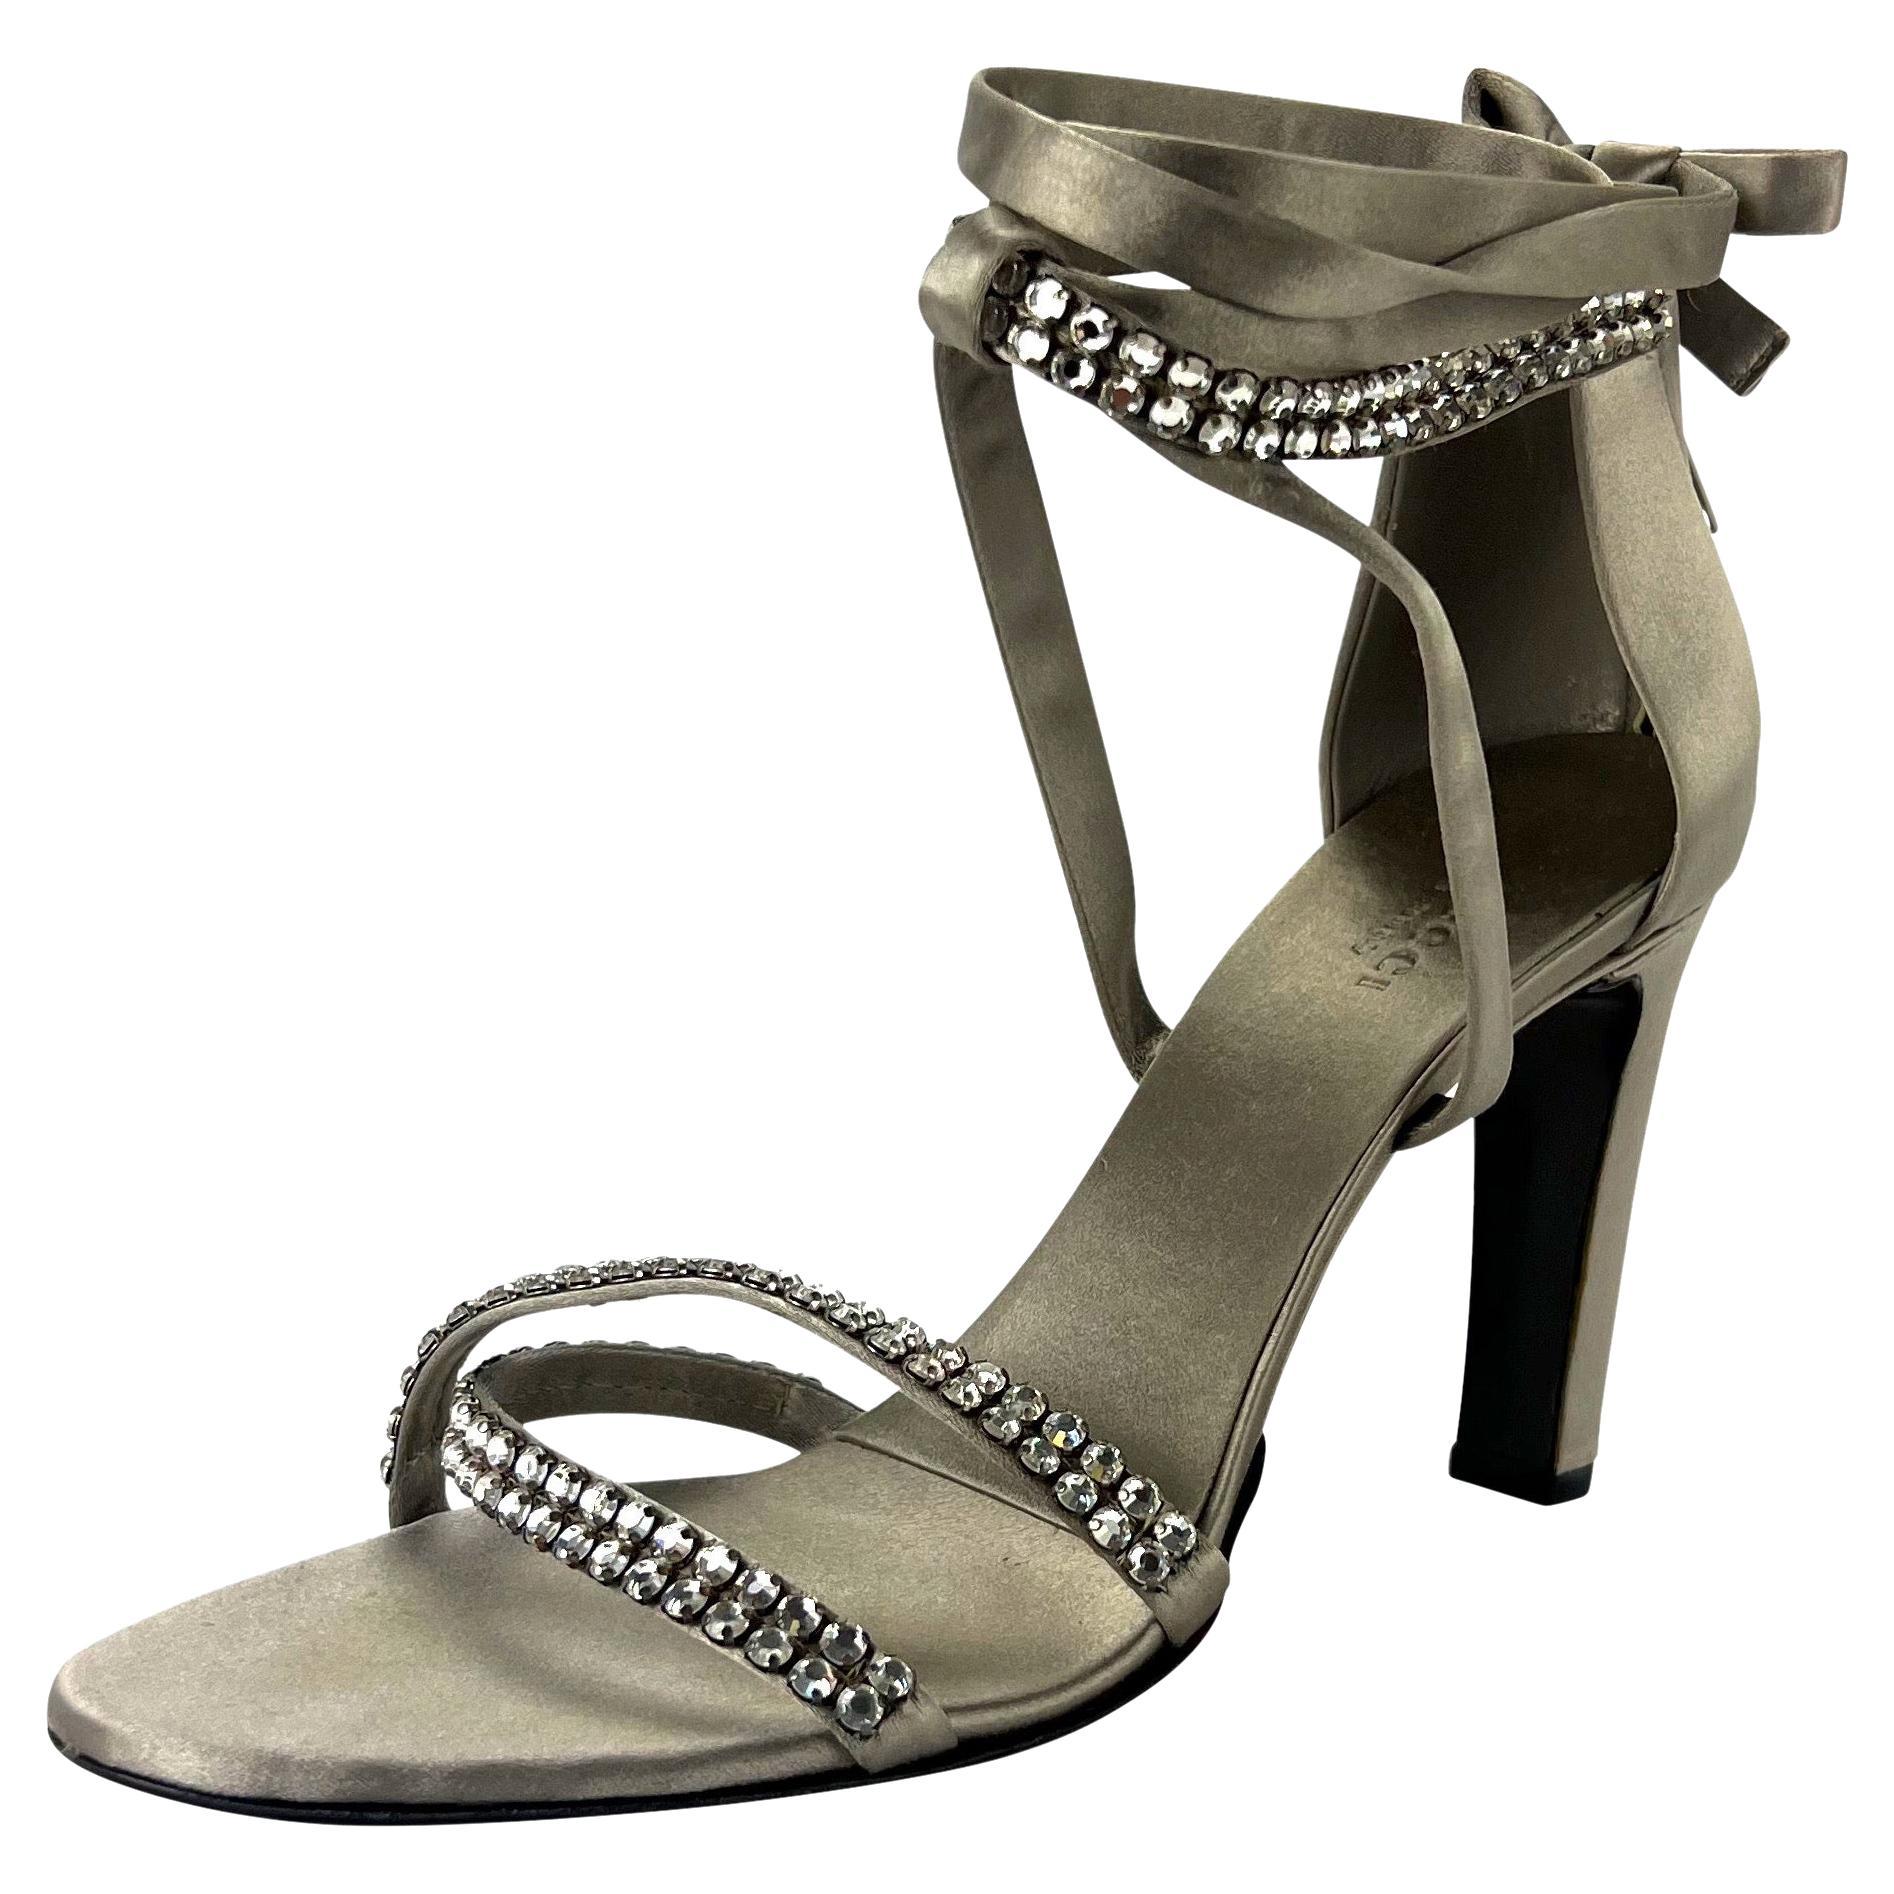 Presenting a fabulous pair of silver silk satin Gucci sandal heels designed by Tom Ford. From the Fall/Winter 2004 collection, these slingback heels are complete with rhinestone accented toe straps and ankle lace ties. 

Additional Measurements: